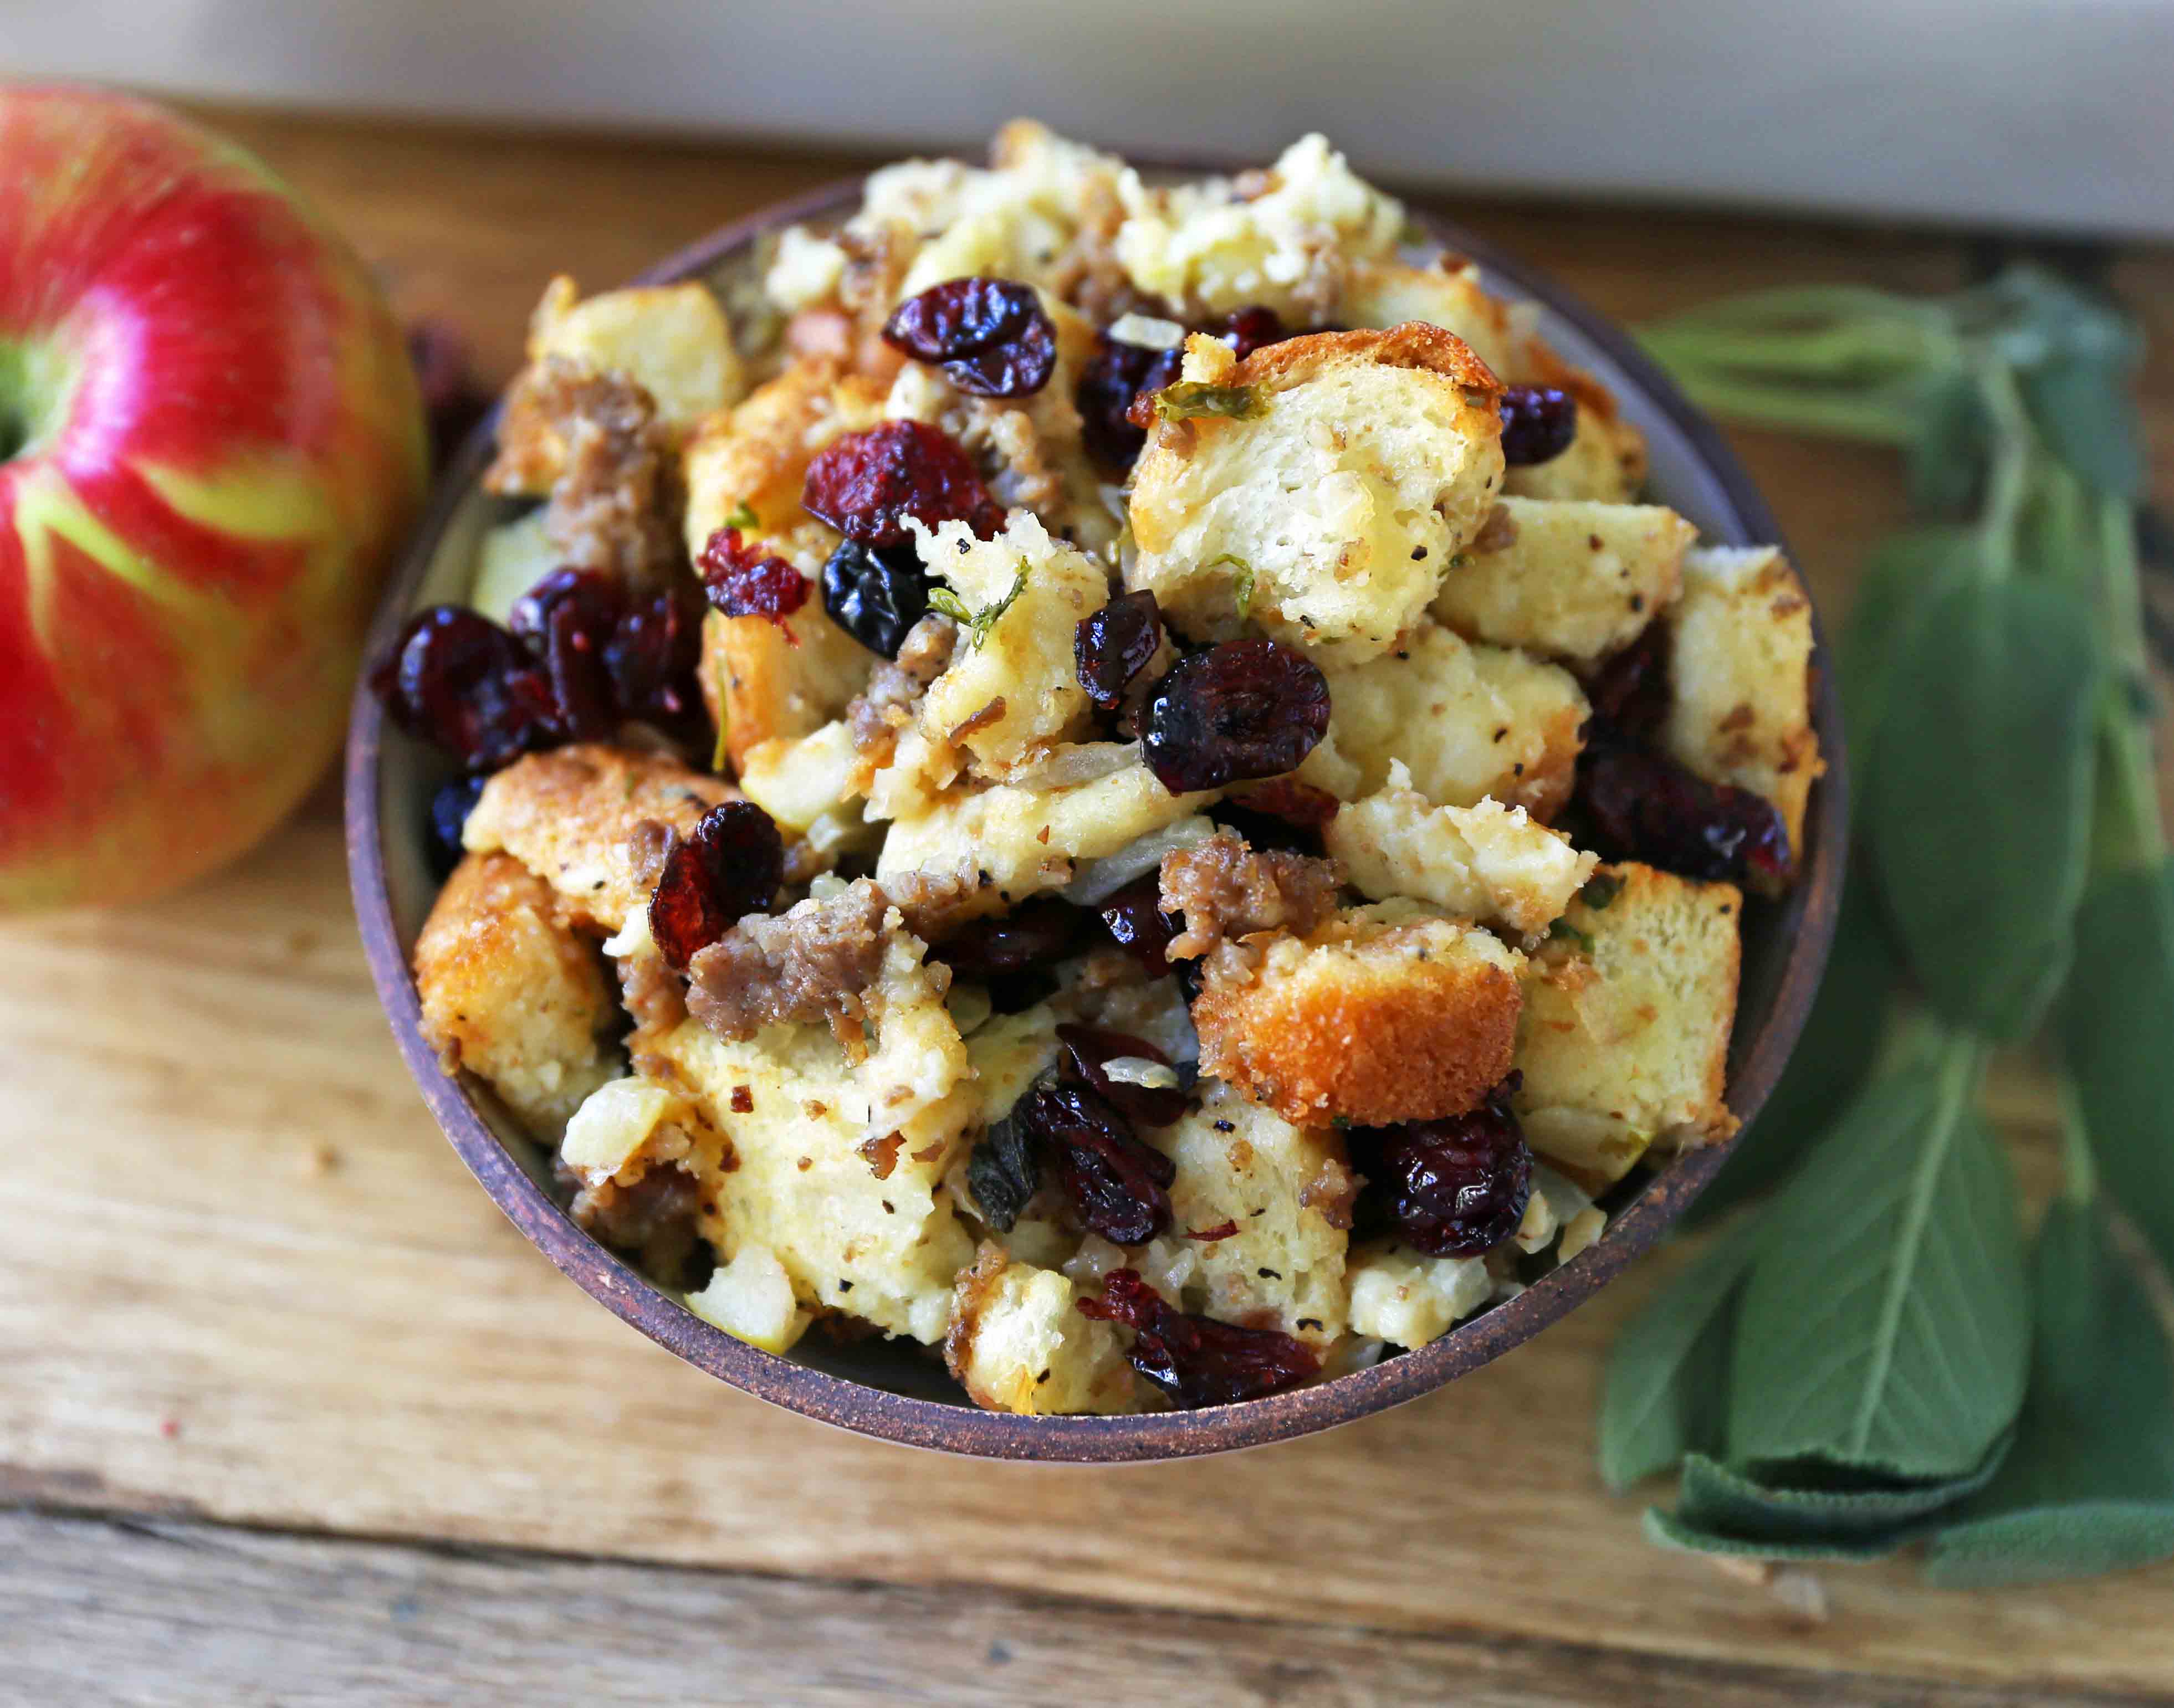 Cranberry Apple Sausage Stuffing. A classic Thanksgiving side dish that is a real crowd pleaser! Homemade Sausage Cranberry Apple Stuffing Recipe. www.modernhoney.com #stuffing #sausasgestuffing #cranberryapplestuffing #sausageapplestuffing #thanksgiving #thanksgivingsides